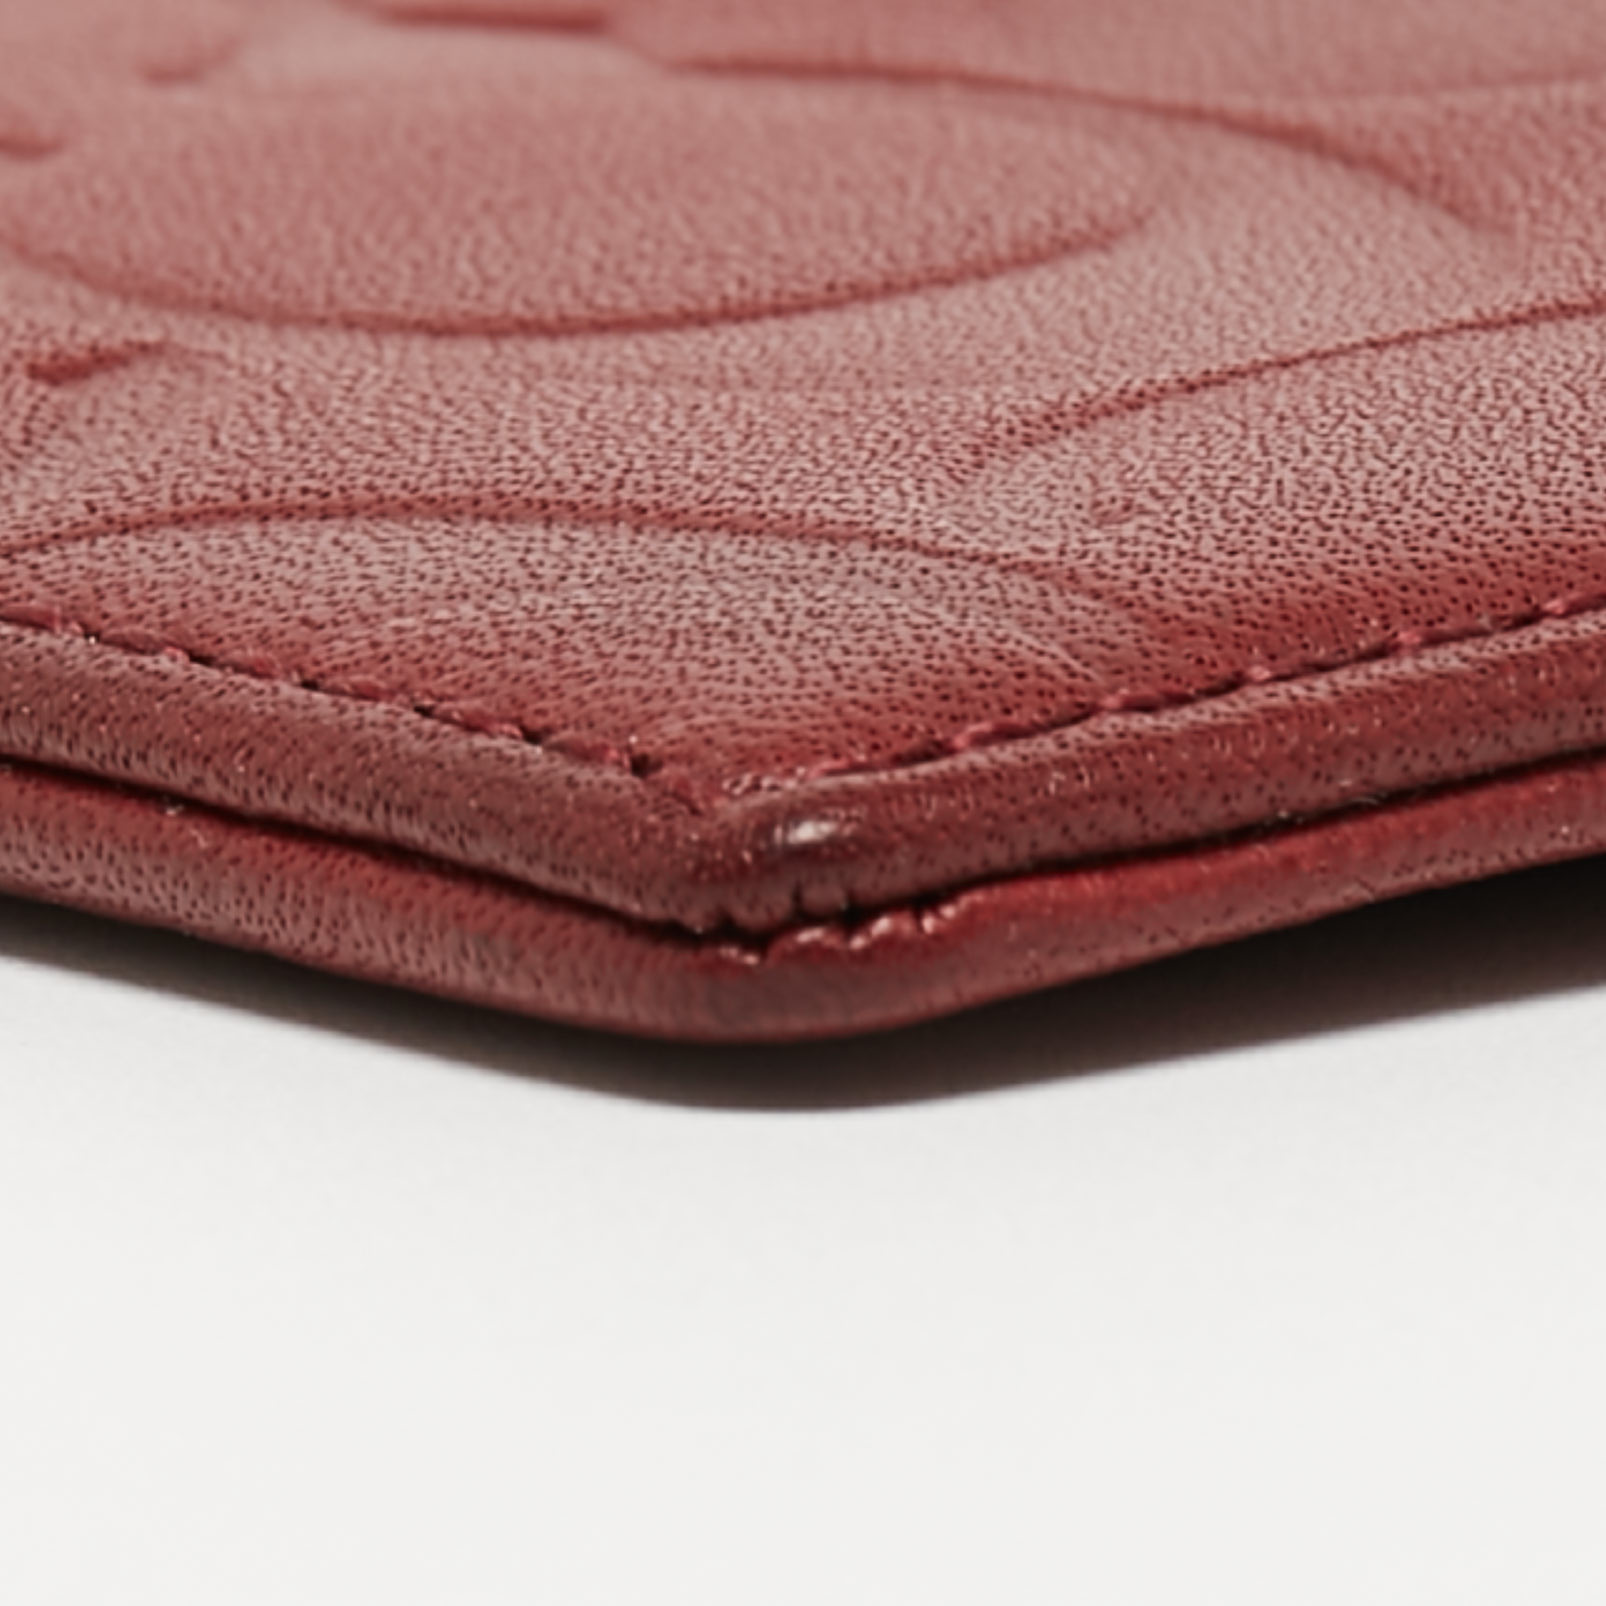 Coach Red Logo Embossed Leather Card Holder